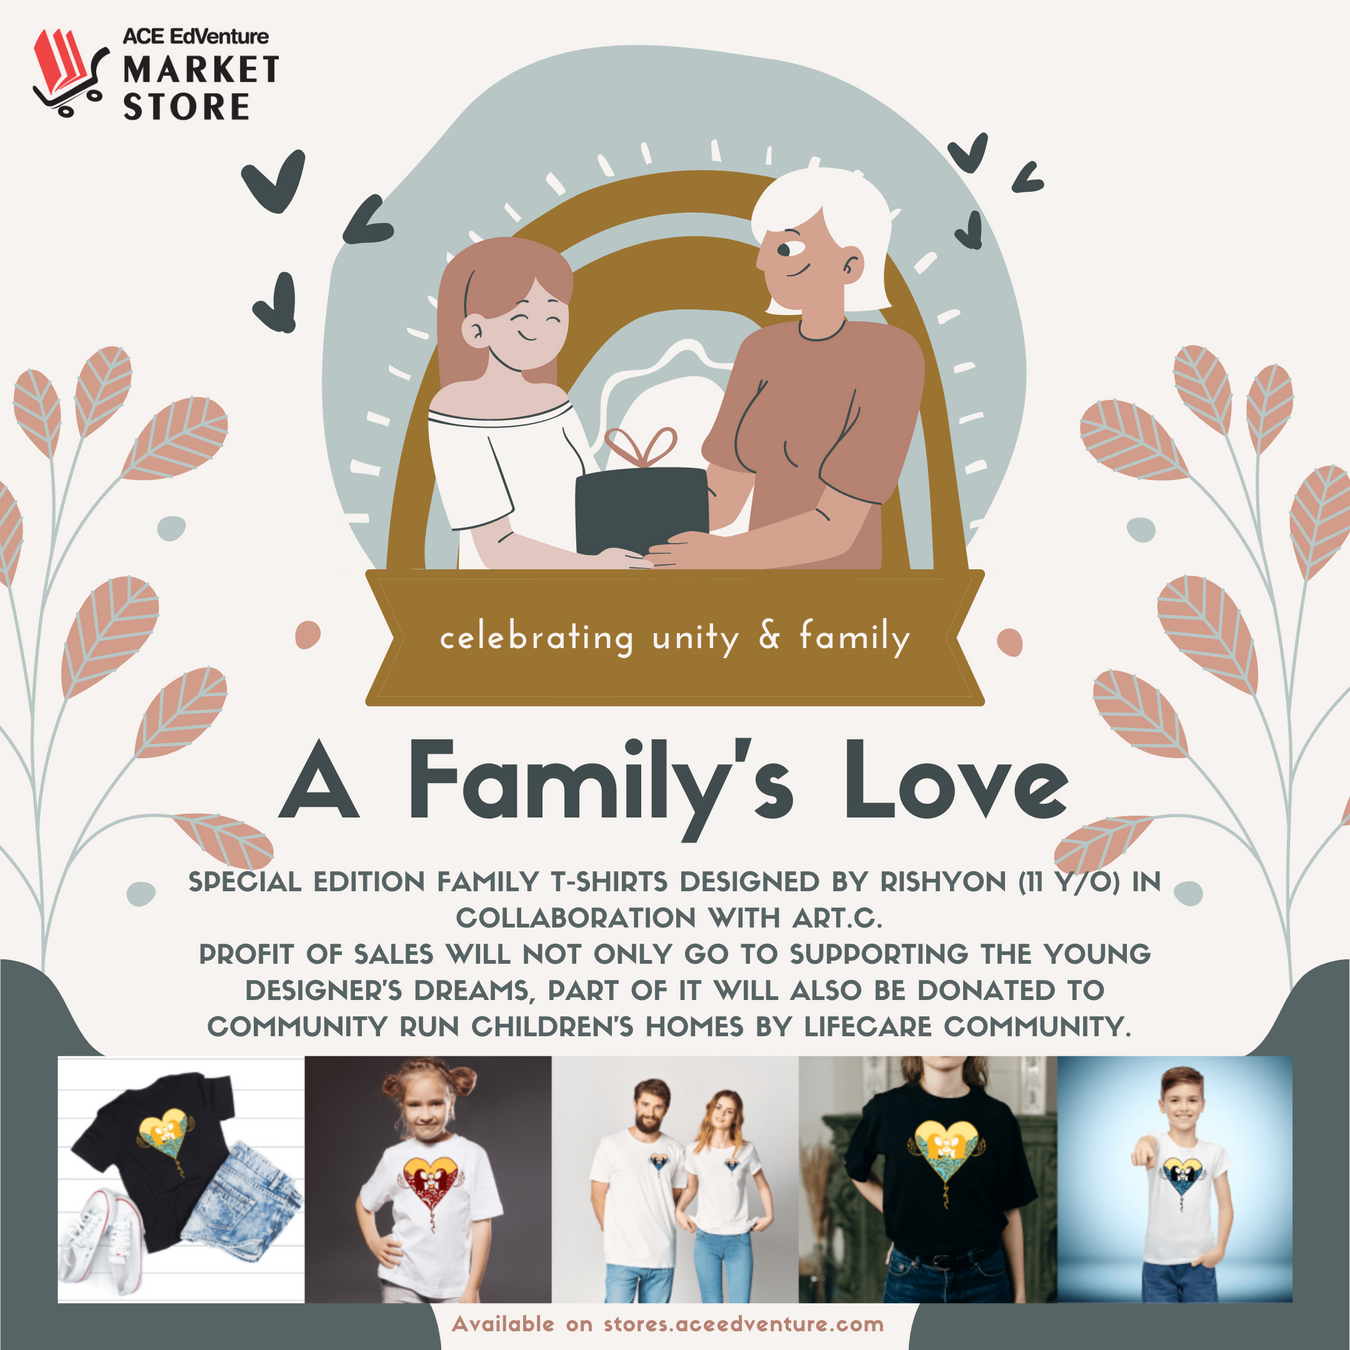 A Family's Love (Special Edition T-shirts)